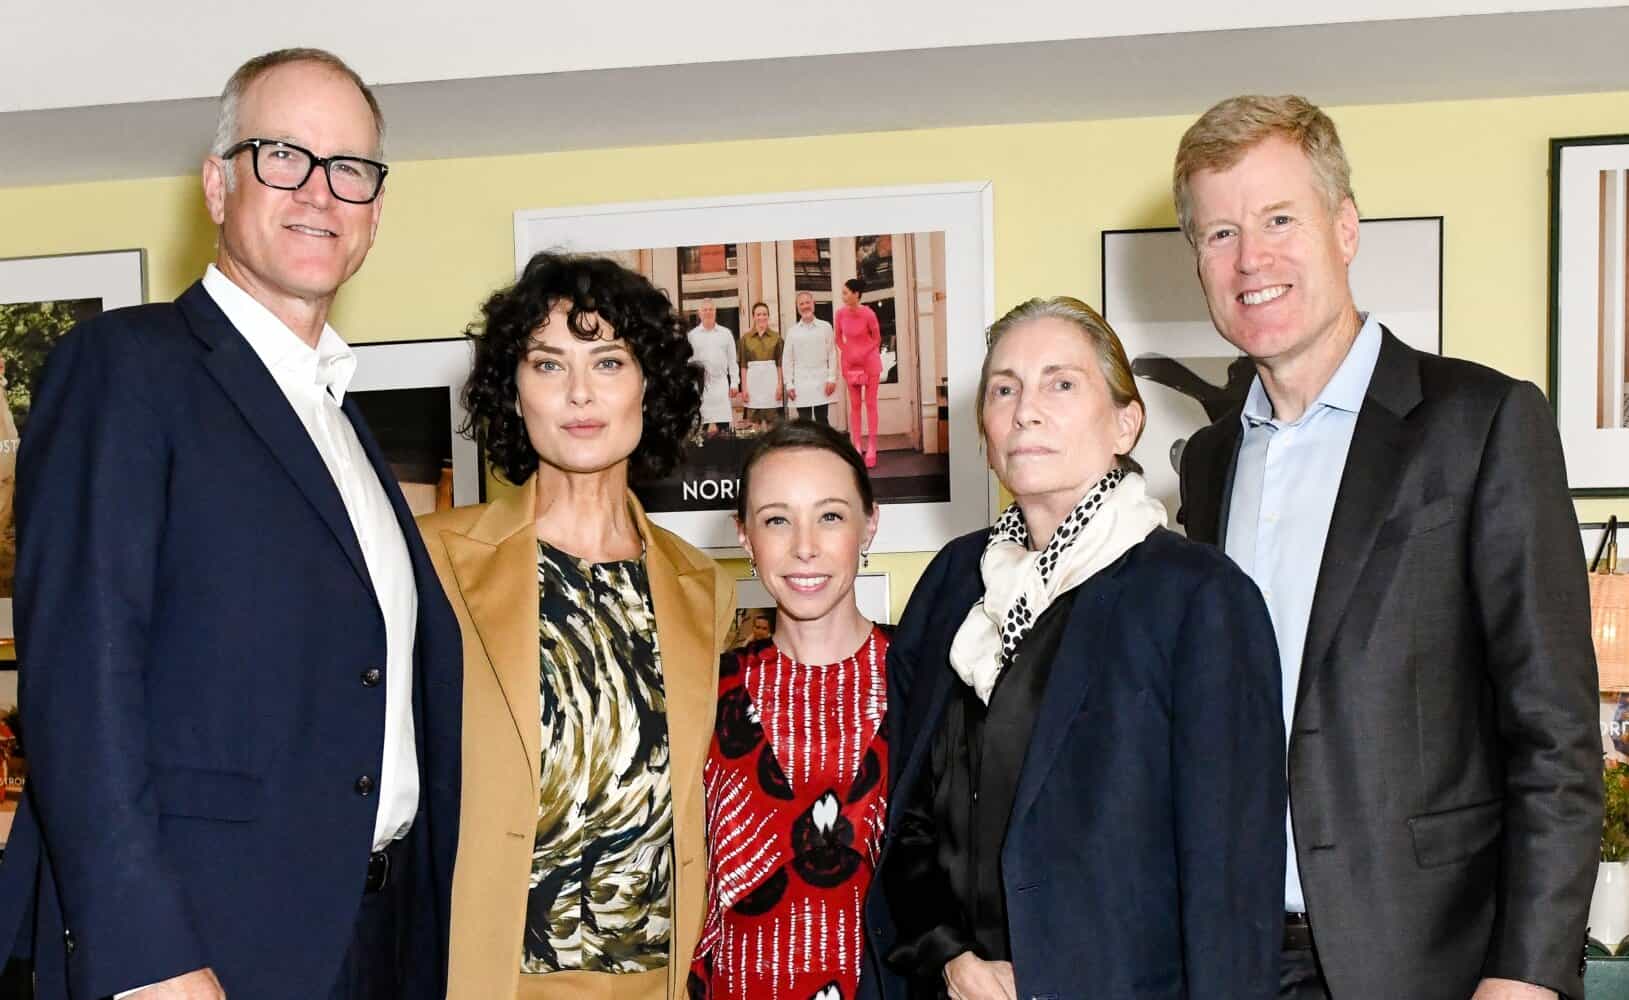 Nordstrom Brings Together Industry Insiders For Pre-NYFW Dinner Hosted By Rickie De Sole, Shalom Harlow, And Tonne Goodman